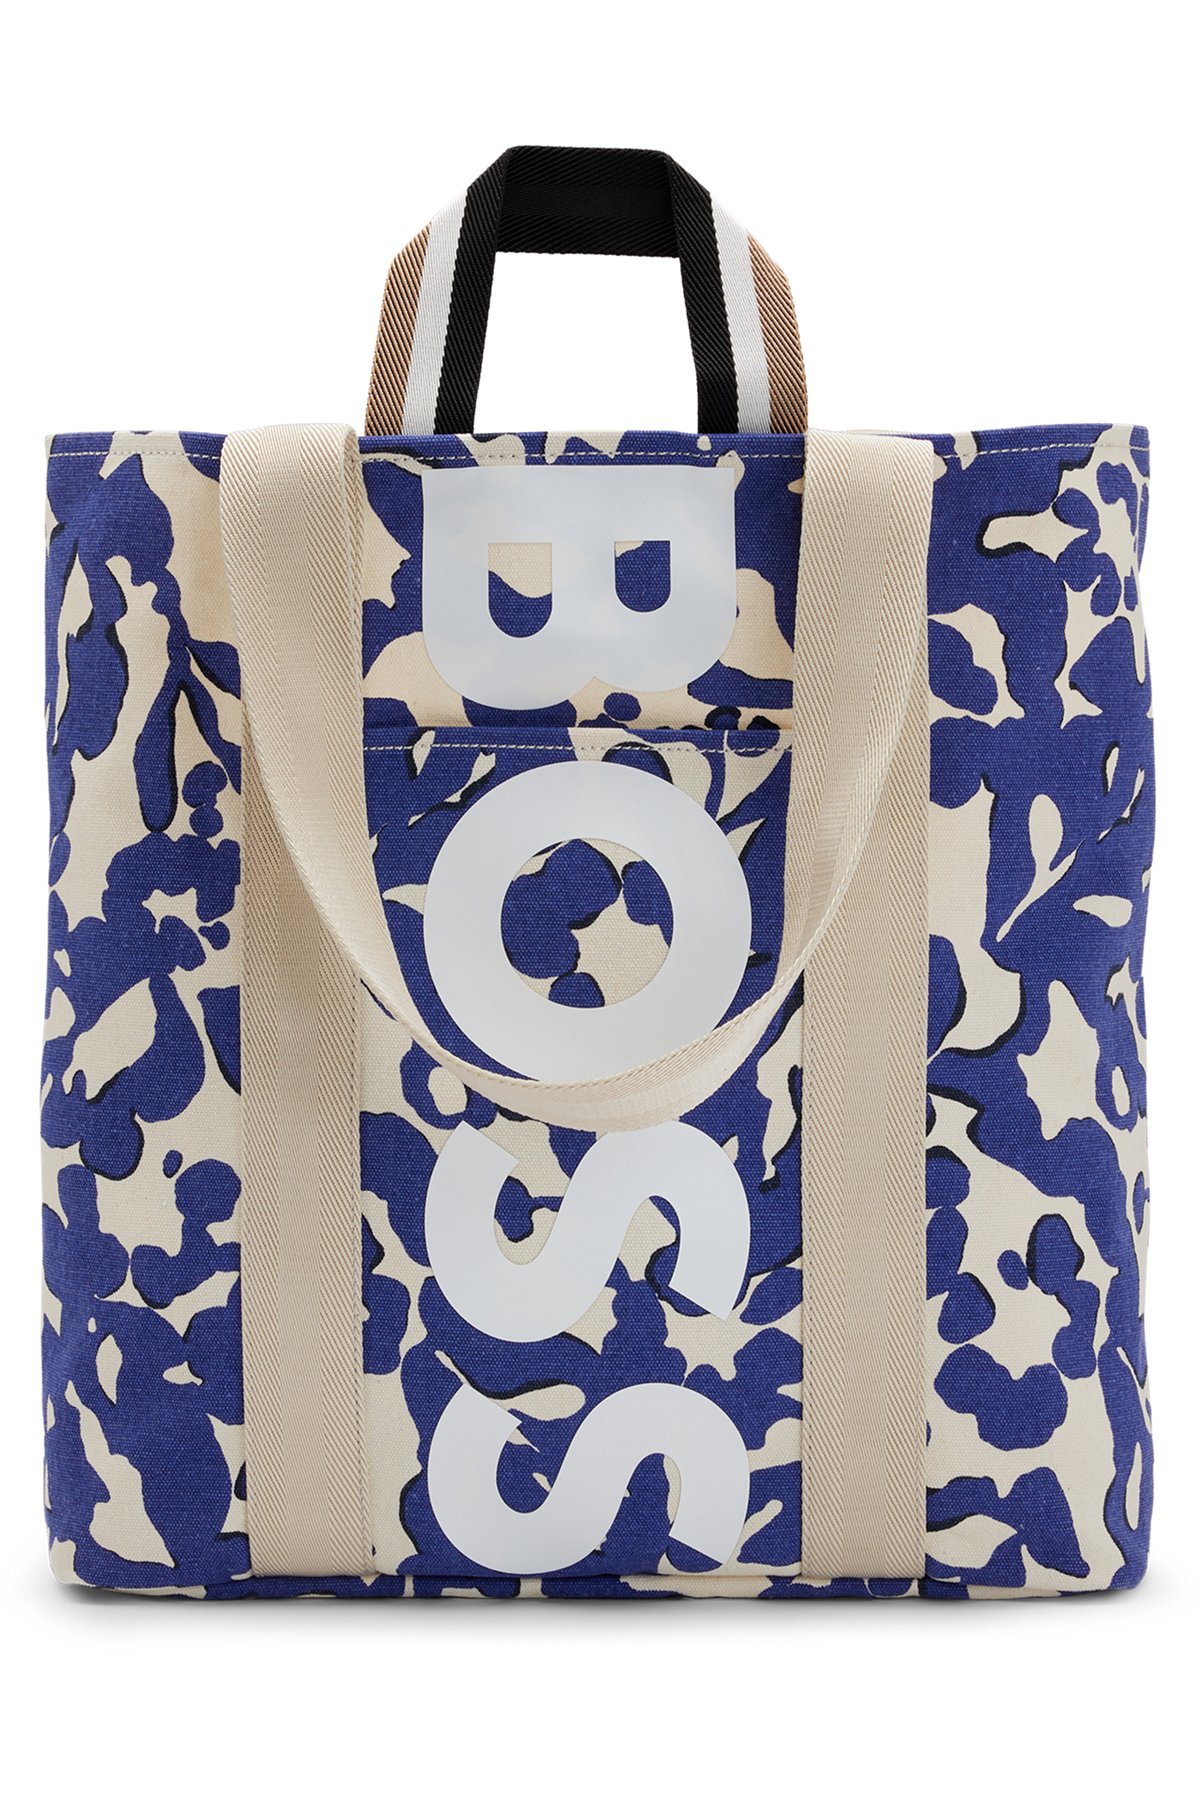 Structured-canvas tote bag with seasonal print and logo, Patterned